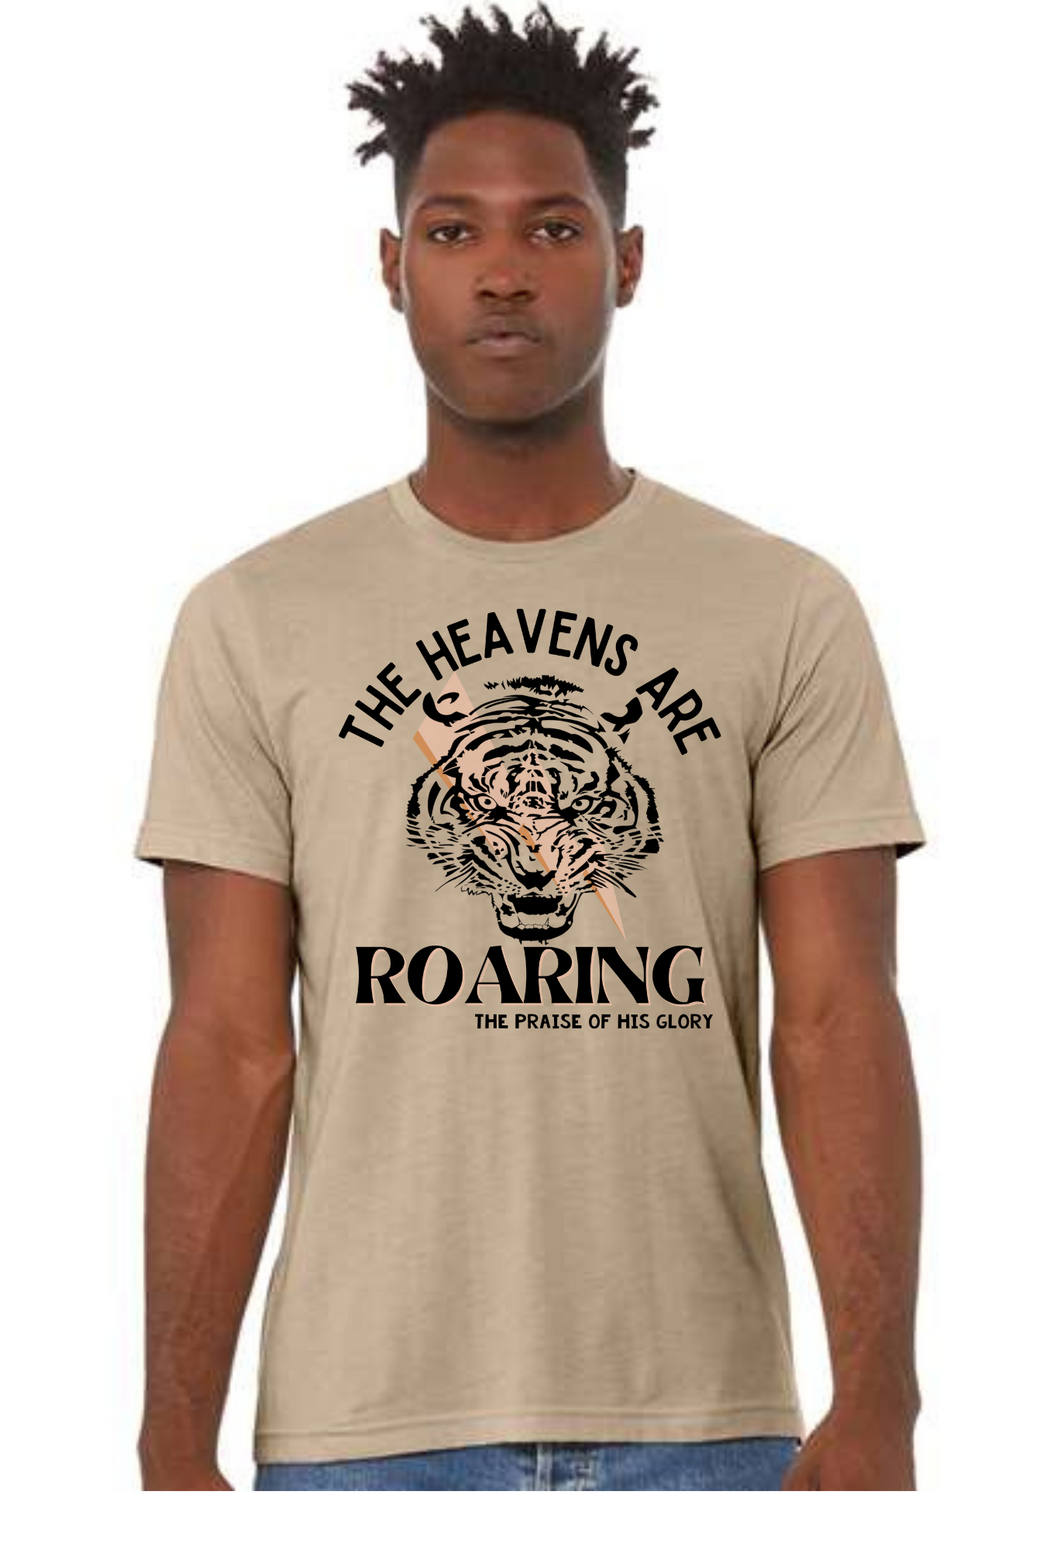 The Heavens are Roaring (neutral colors- unisex)